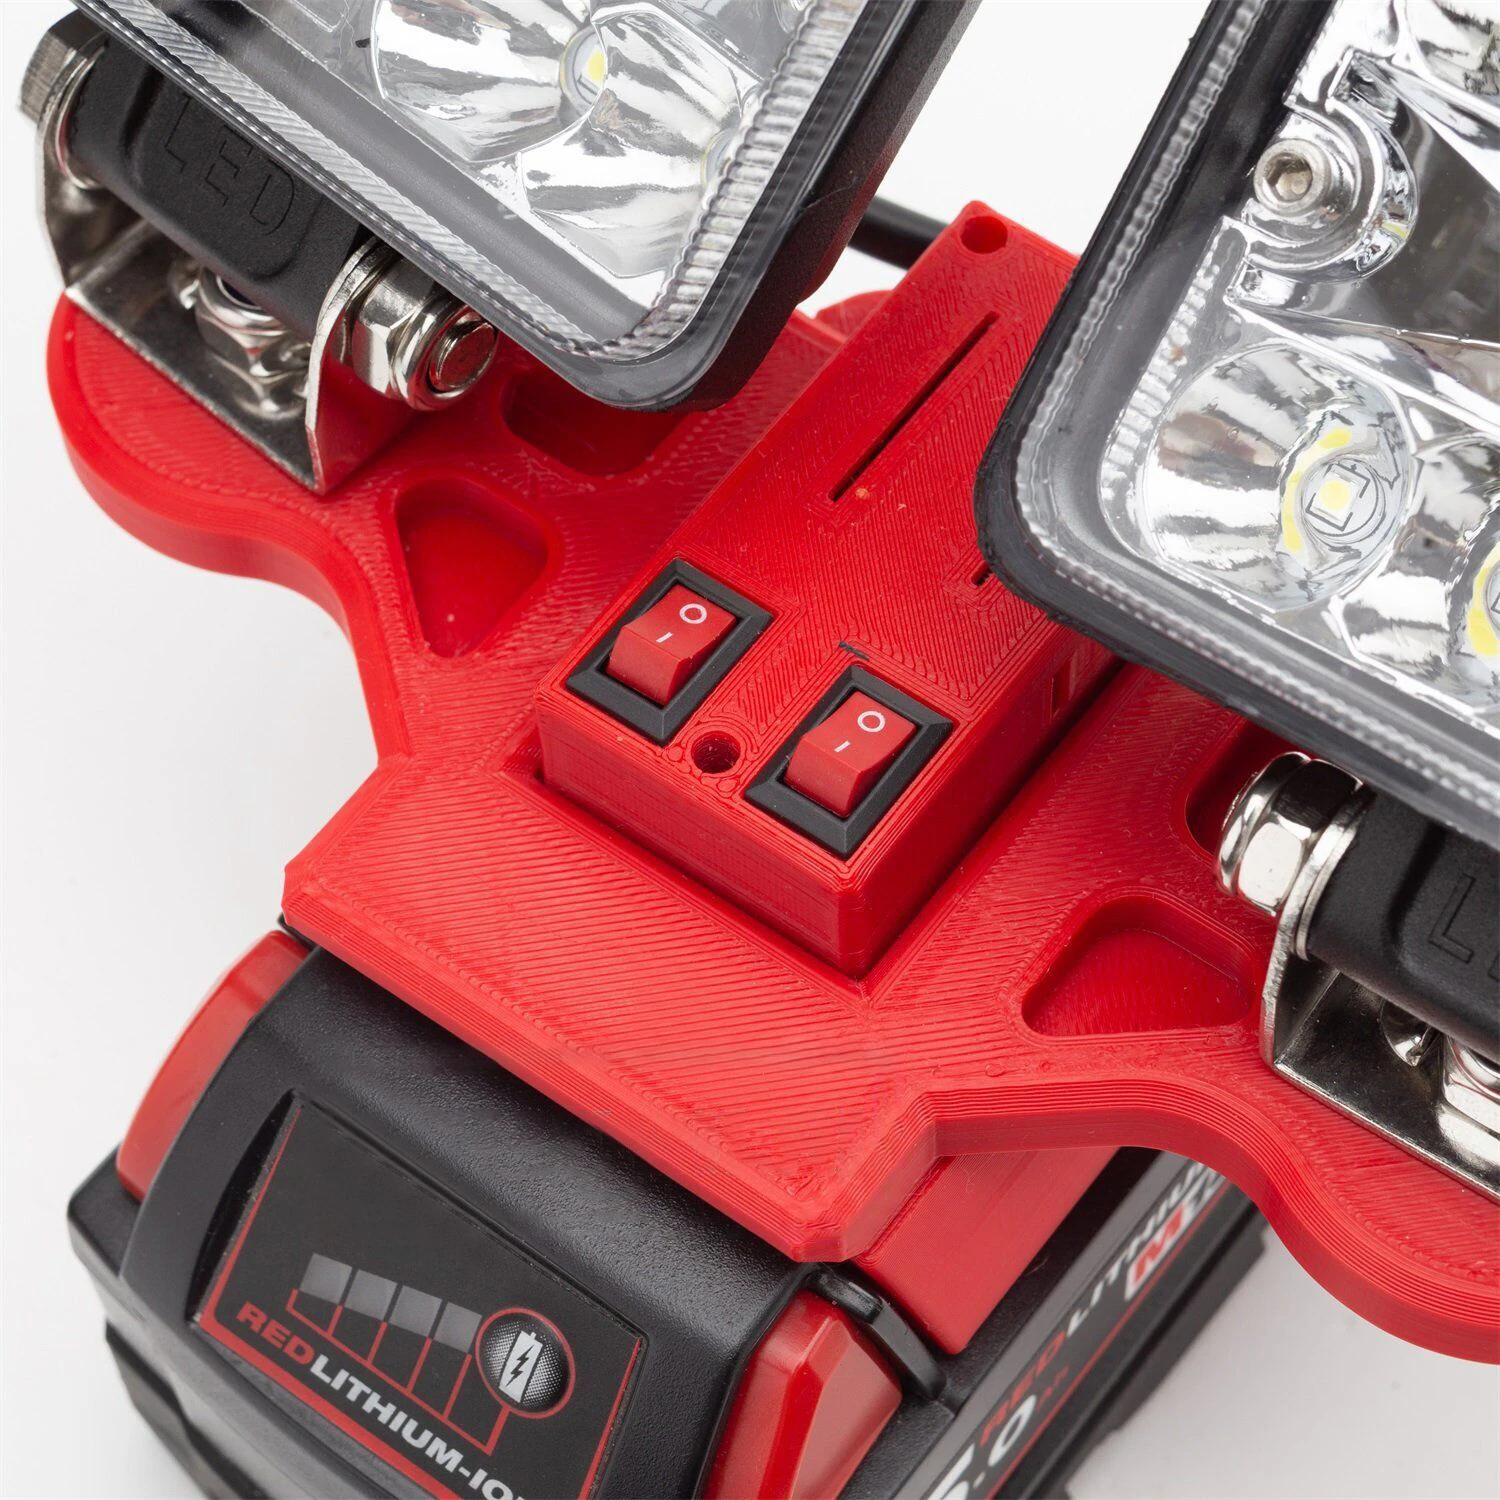 Work Light 1800 Lumens  For  Milwaukee M18 18V Dual 36W Red High And Low Flashing 18 Lamp Bead 3-Speed Adjustment Square 3-Inch enlarge